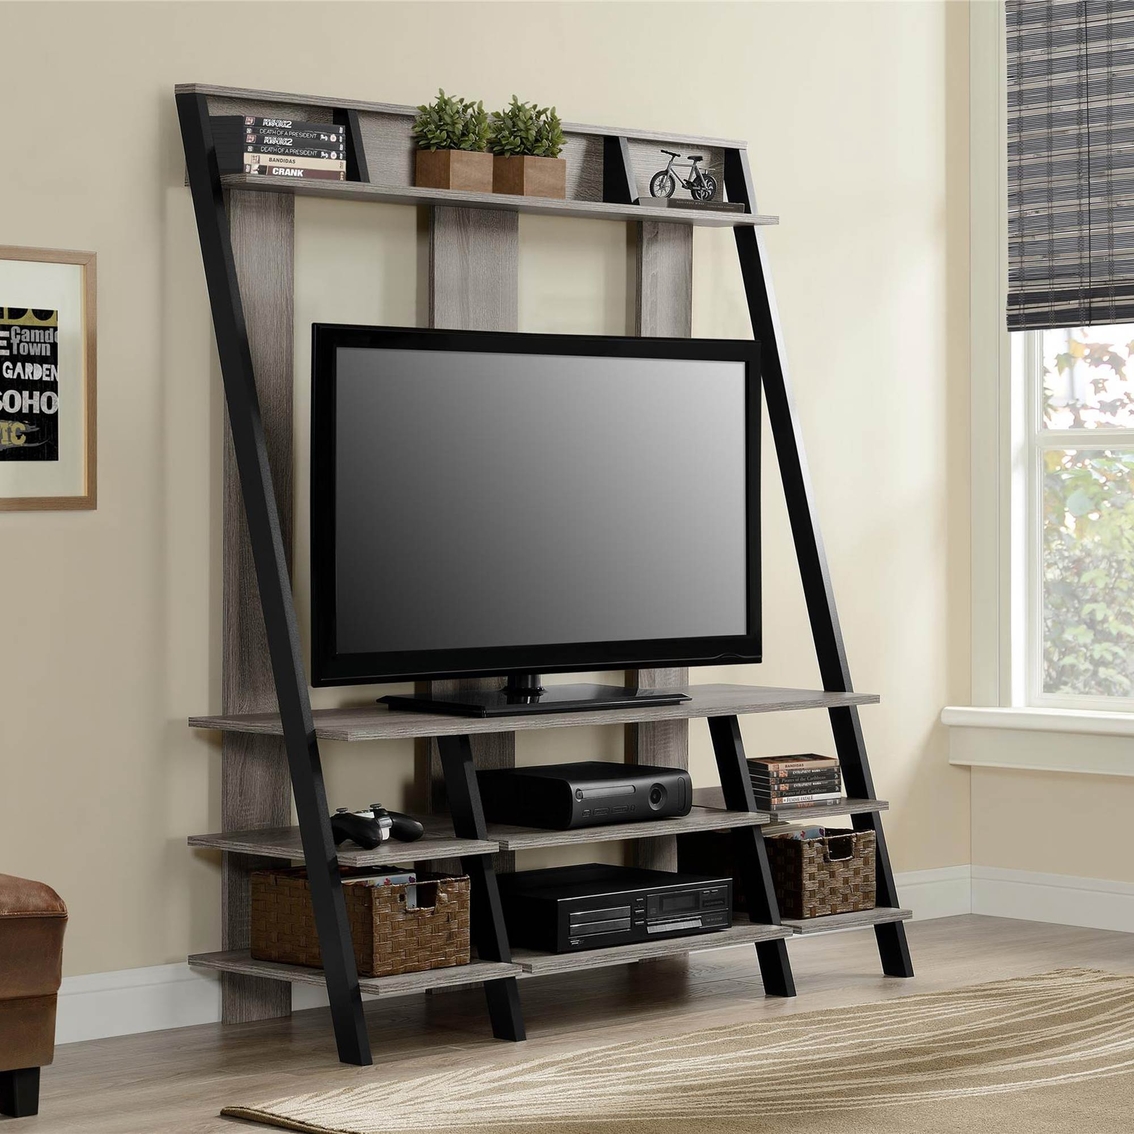 Altra Dunnington Ladder Style Home Entertainment Center - Image 2 of 4